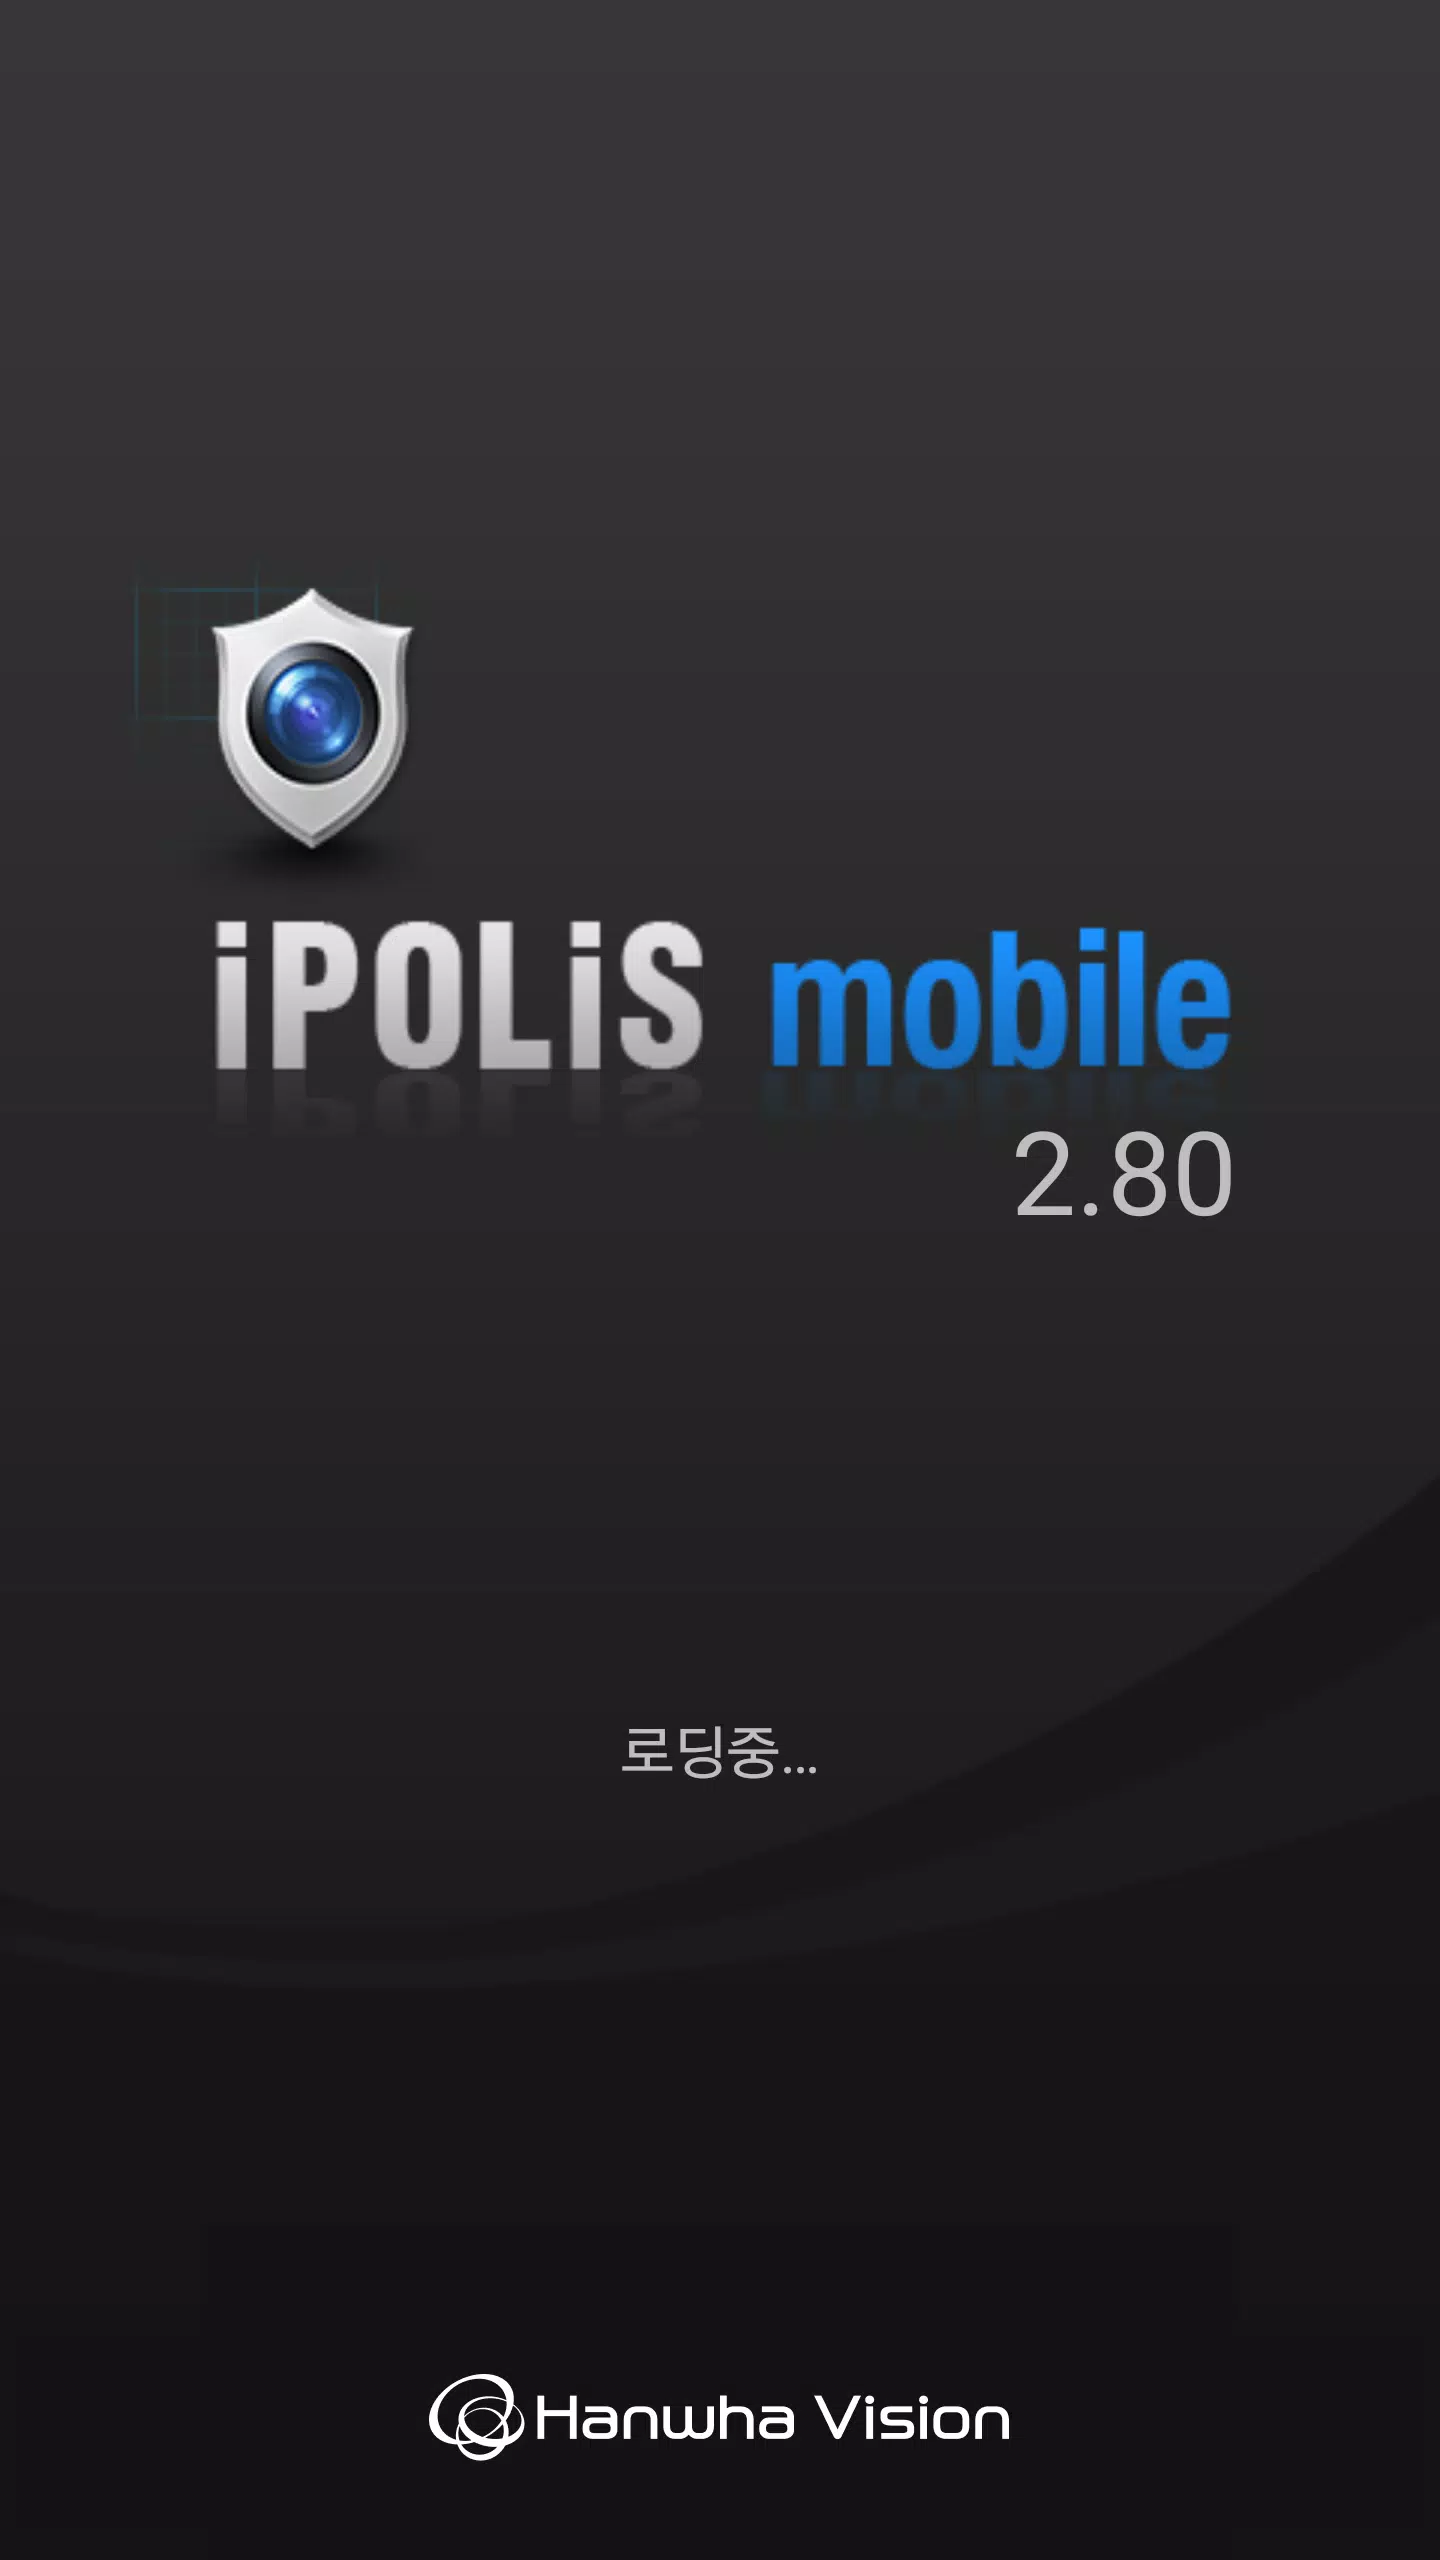 iPOLiS mobile Apk Download for Android- Latest version 2.8.8-  com.samsung.ipolis